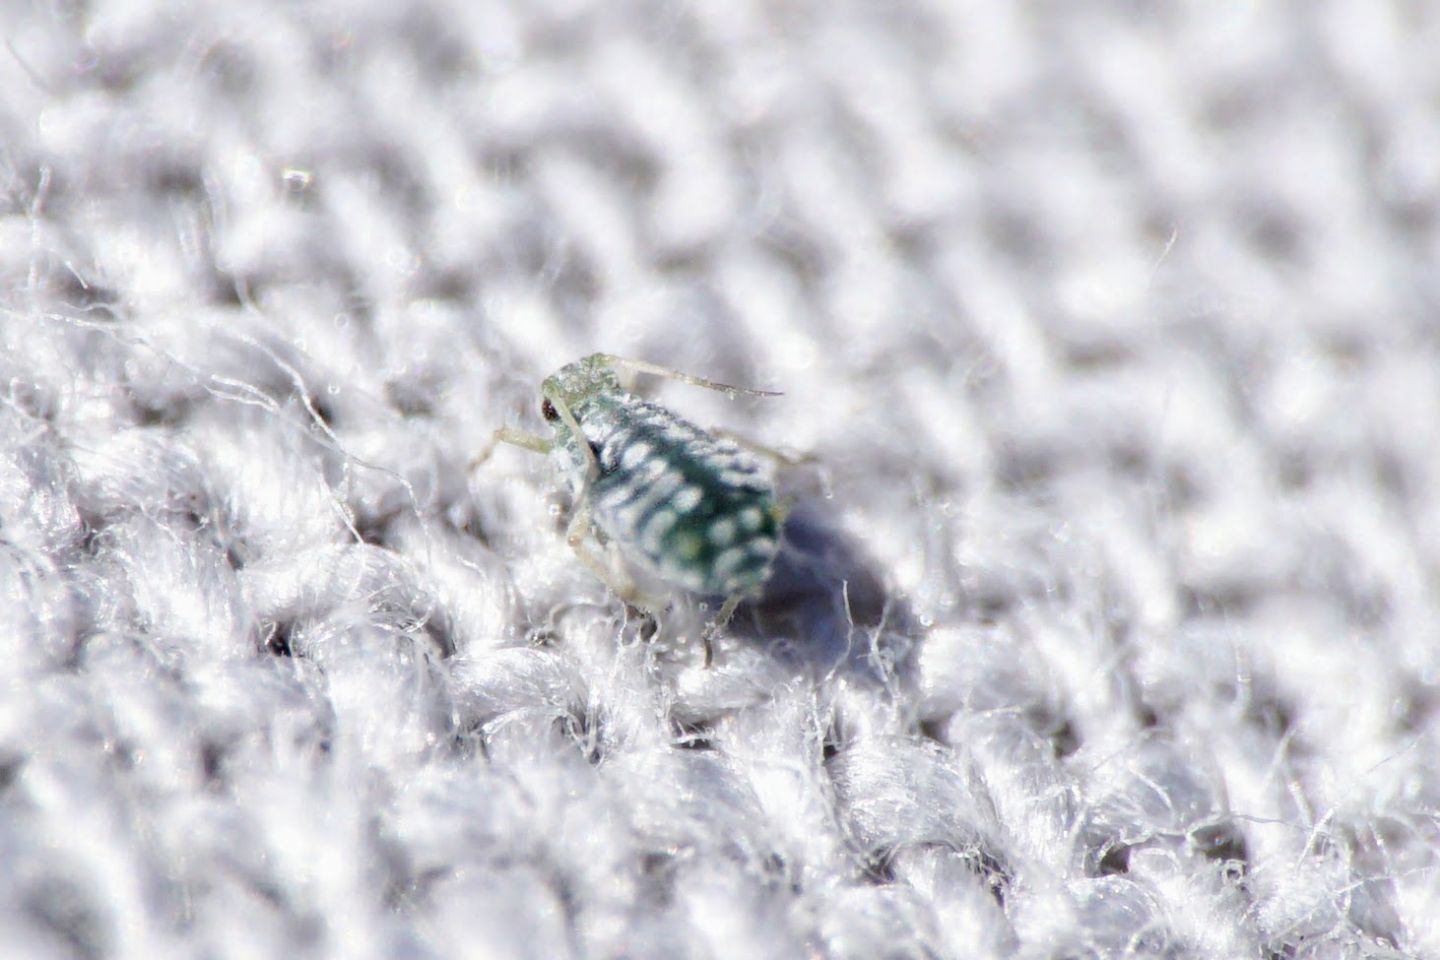 Aphid on Clematis, Croatia:  Aphis clematidis